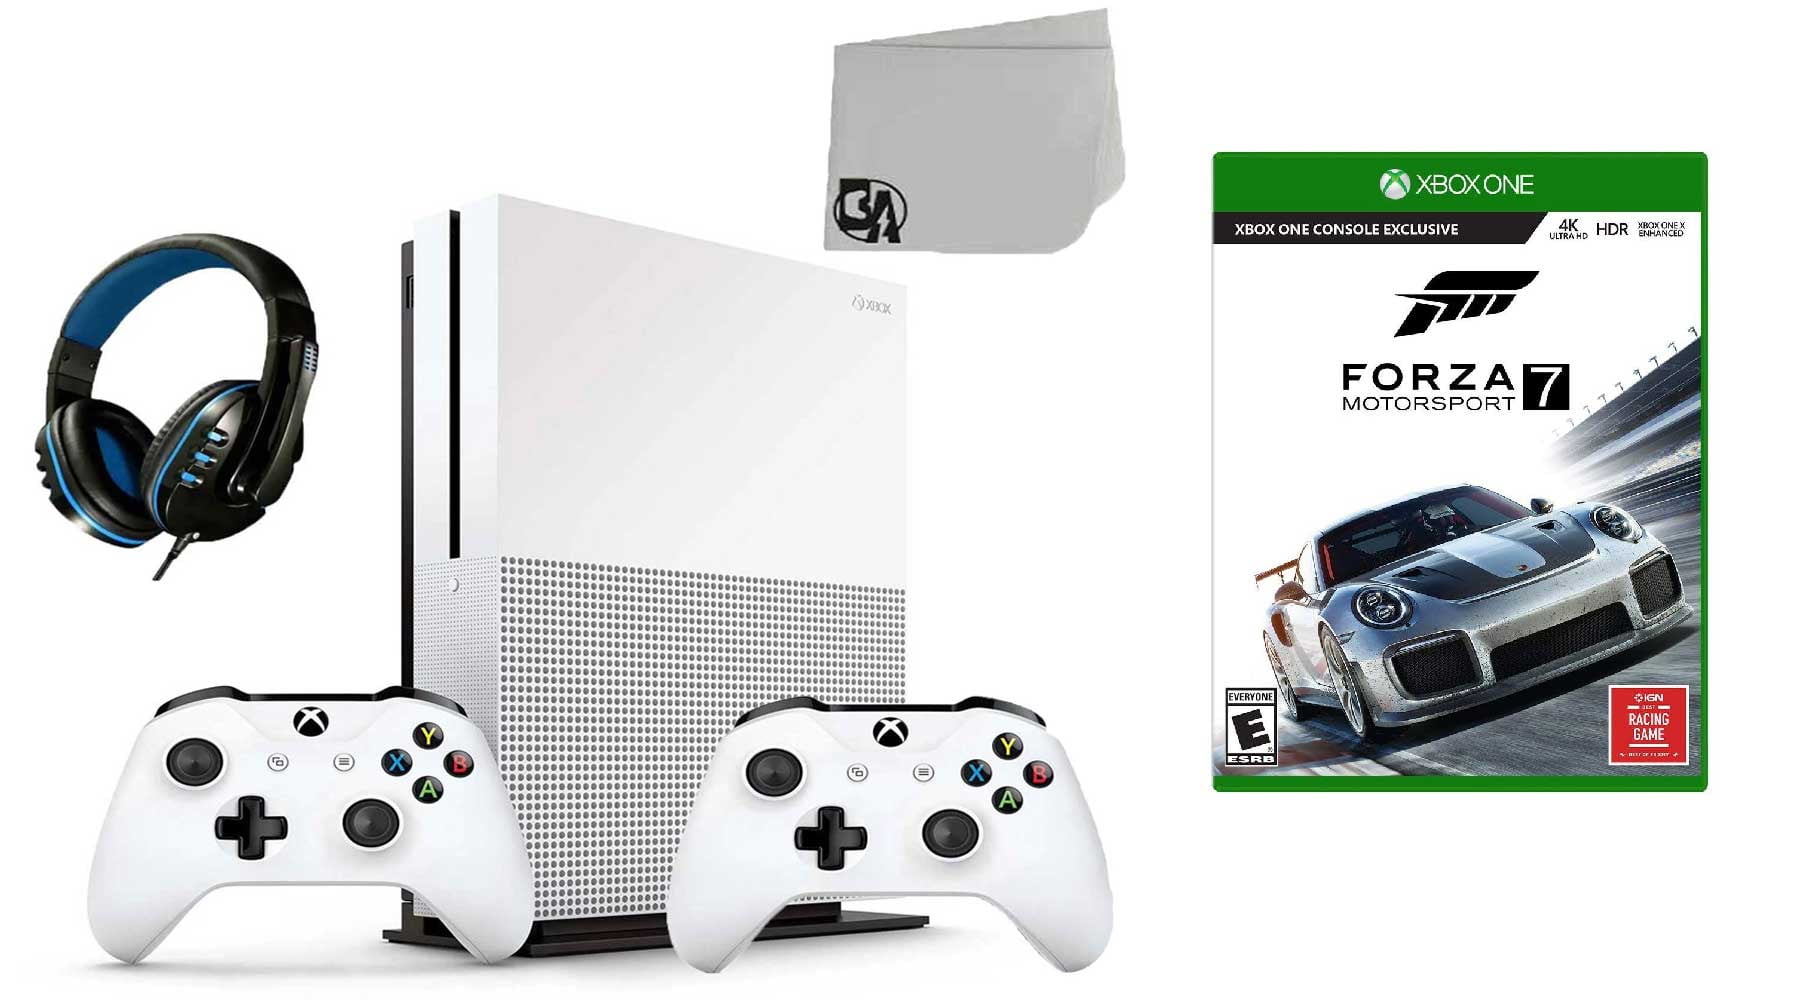 Microsoft Xbox One S 500GB Gaming Console White 2 Controller Included BOLT  AXTION Bundle Like New 